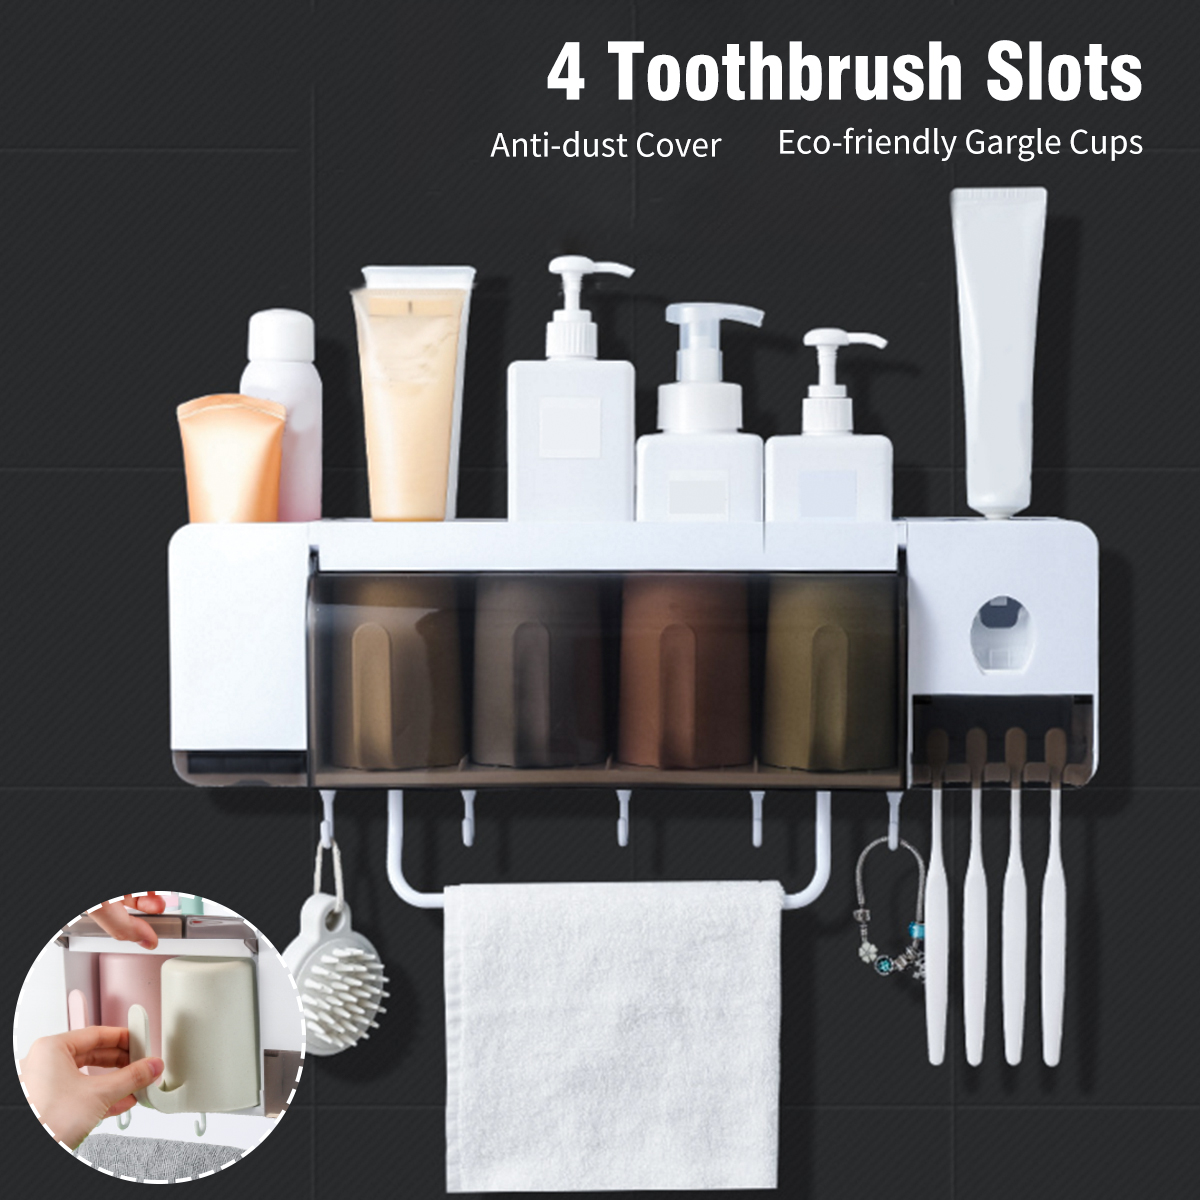 Automatic-Toothpaste-Dispenser-Toothbrush-Holder-Wall-Mounted-Storage-Stand--234-Cups-1664832-4